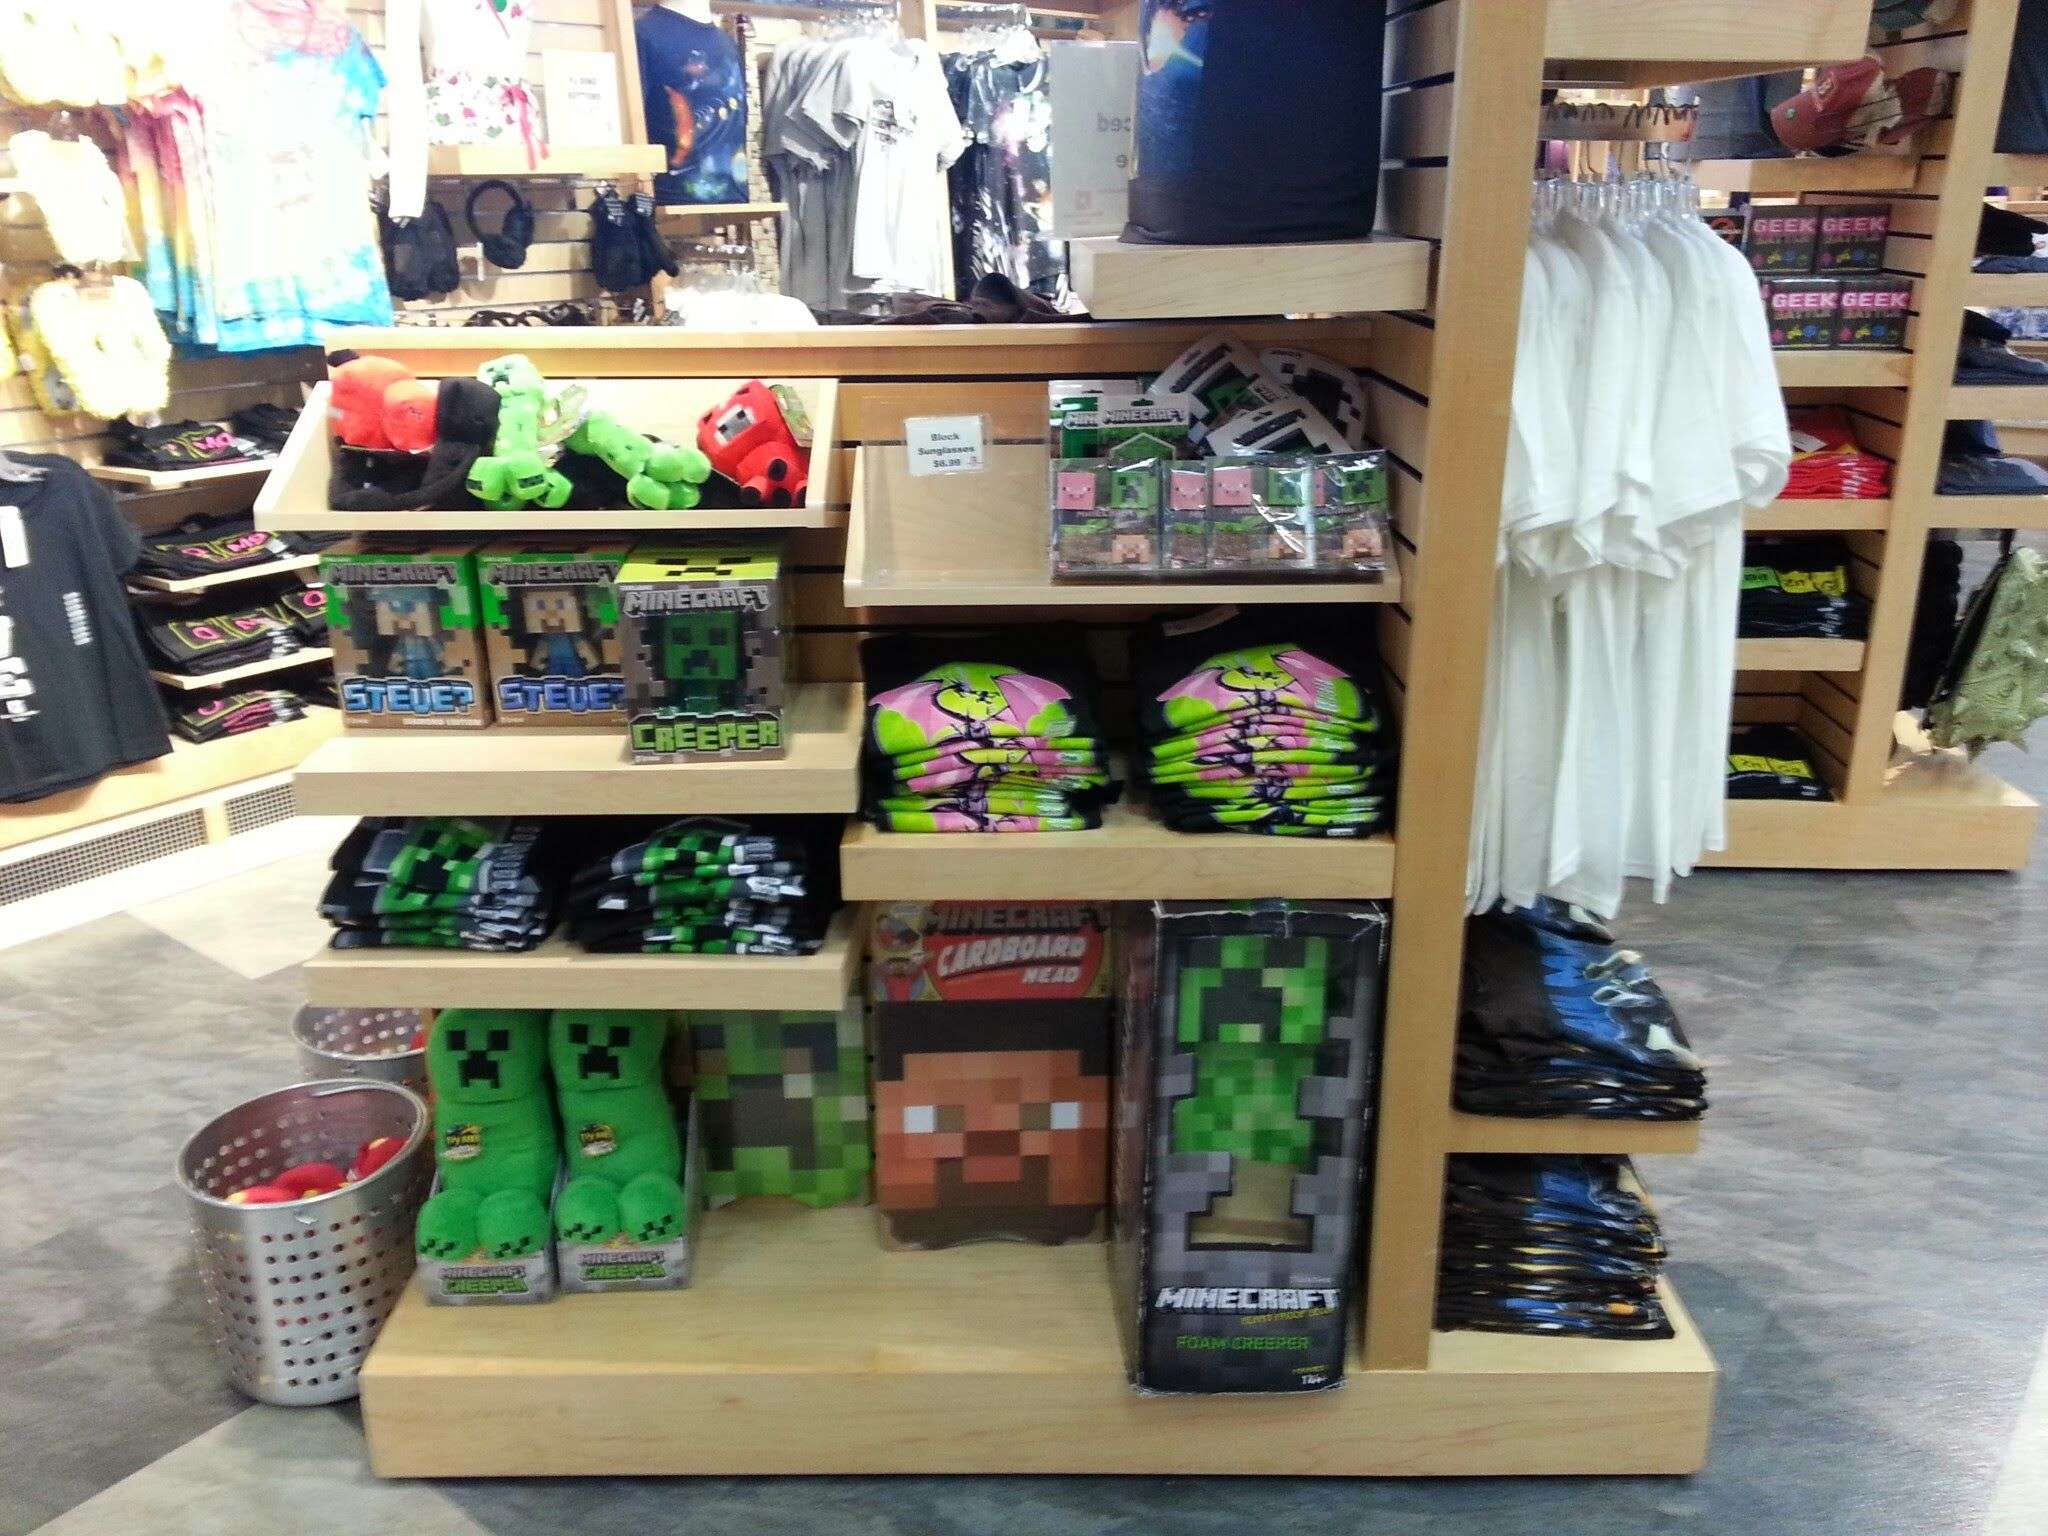 The #Minecraft and #Maker shelf at the @Museum of Science ...